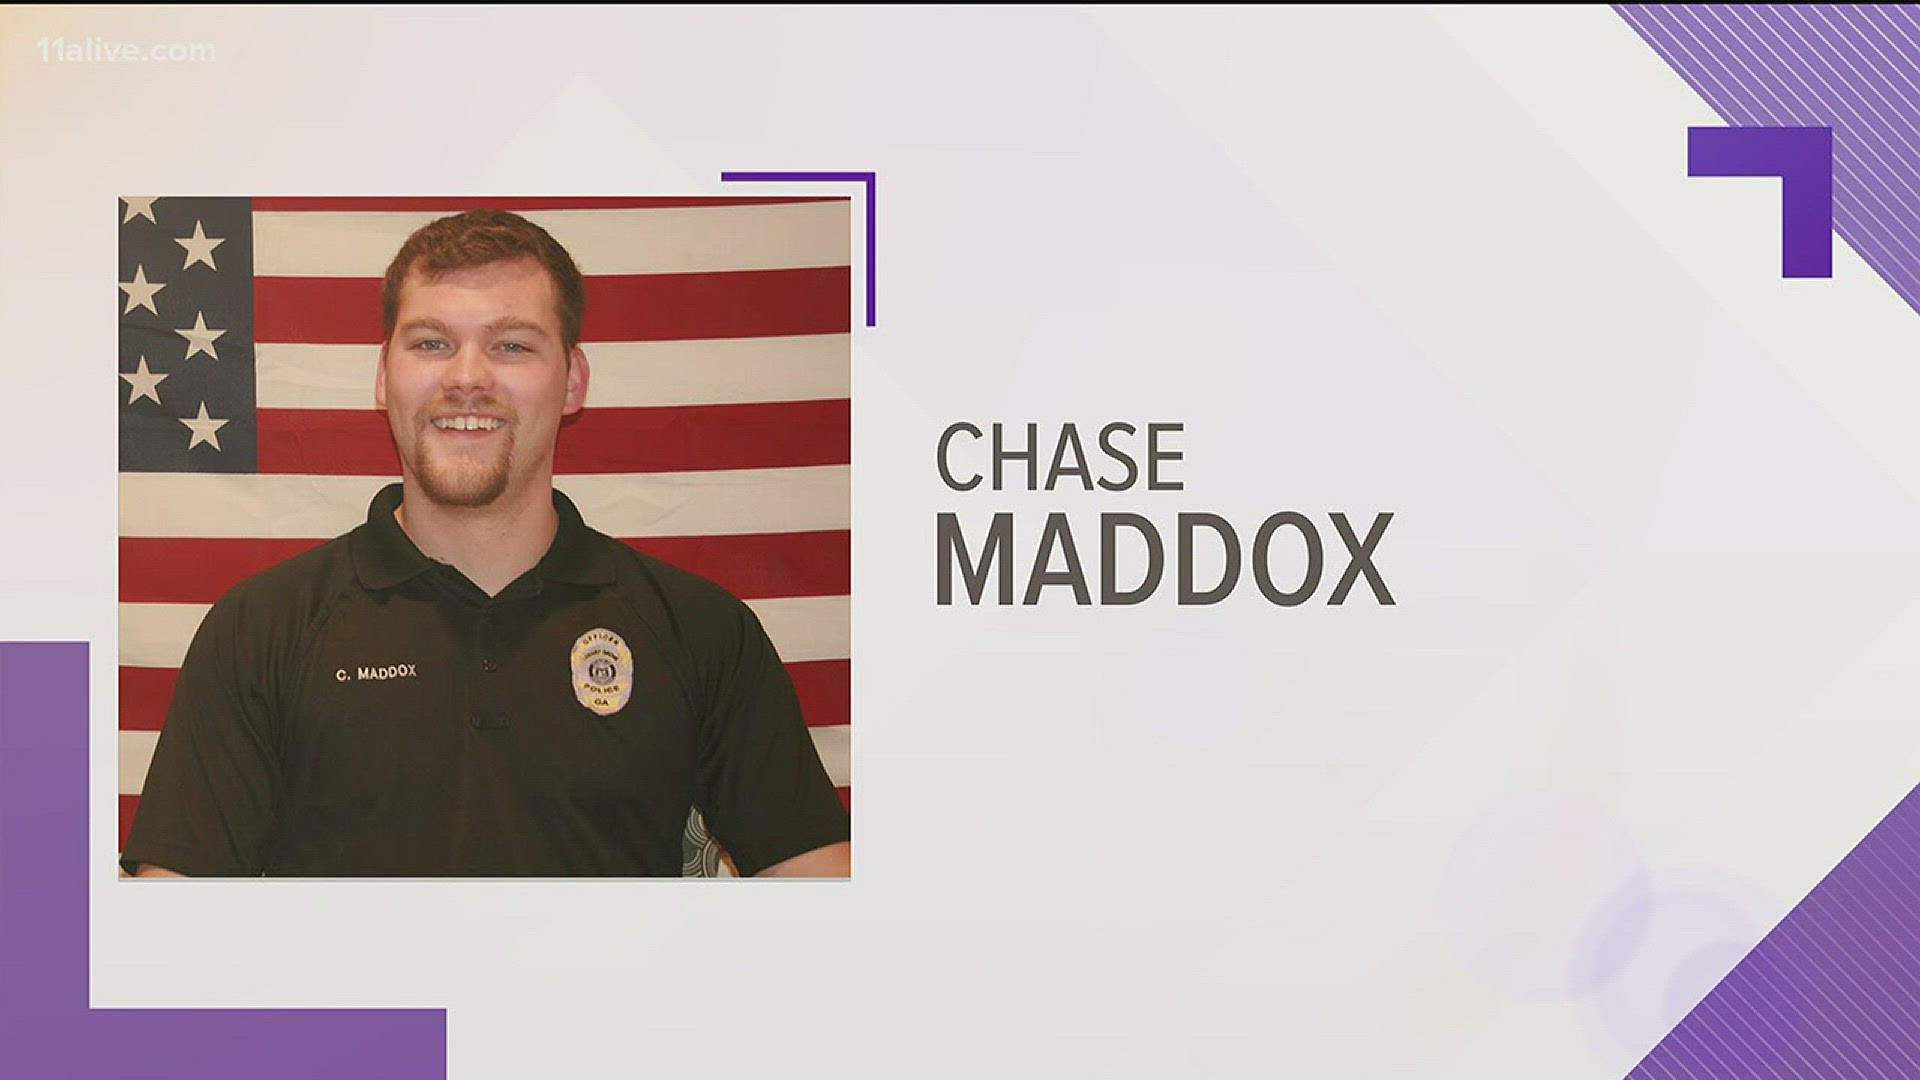 Chase Maddox was about to become a father for the second time.